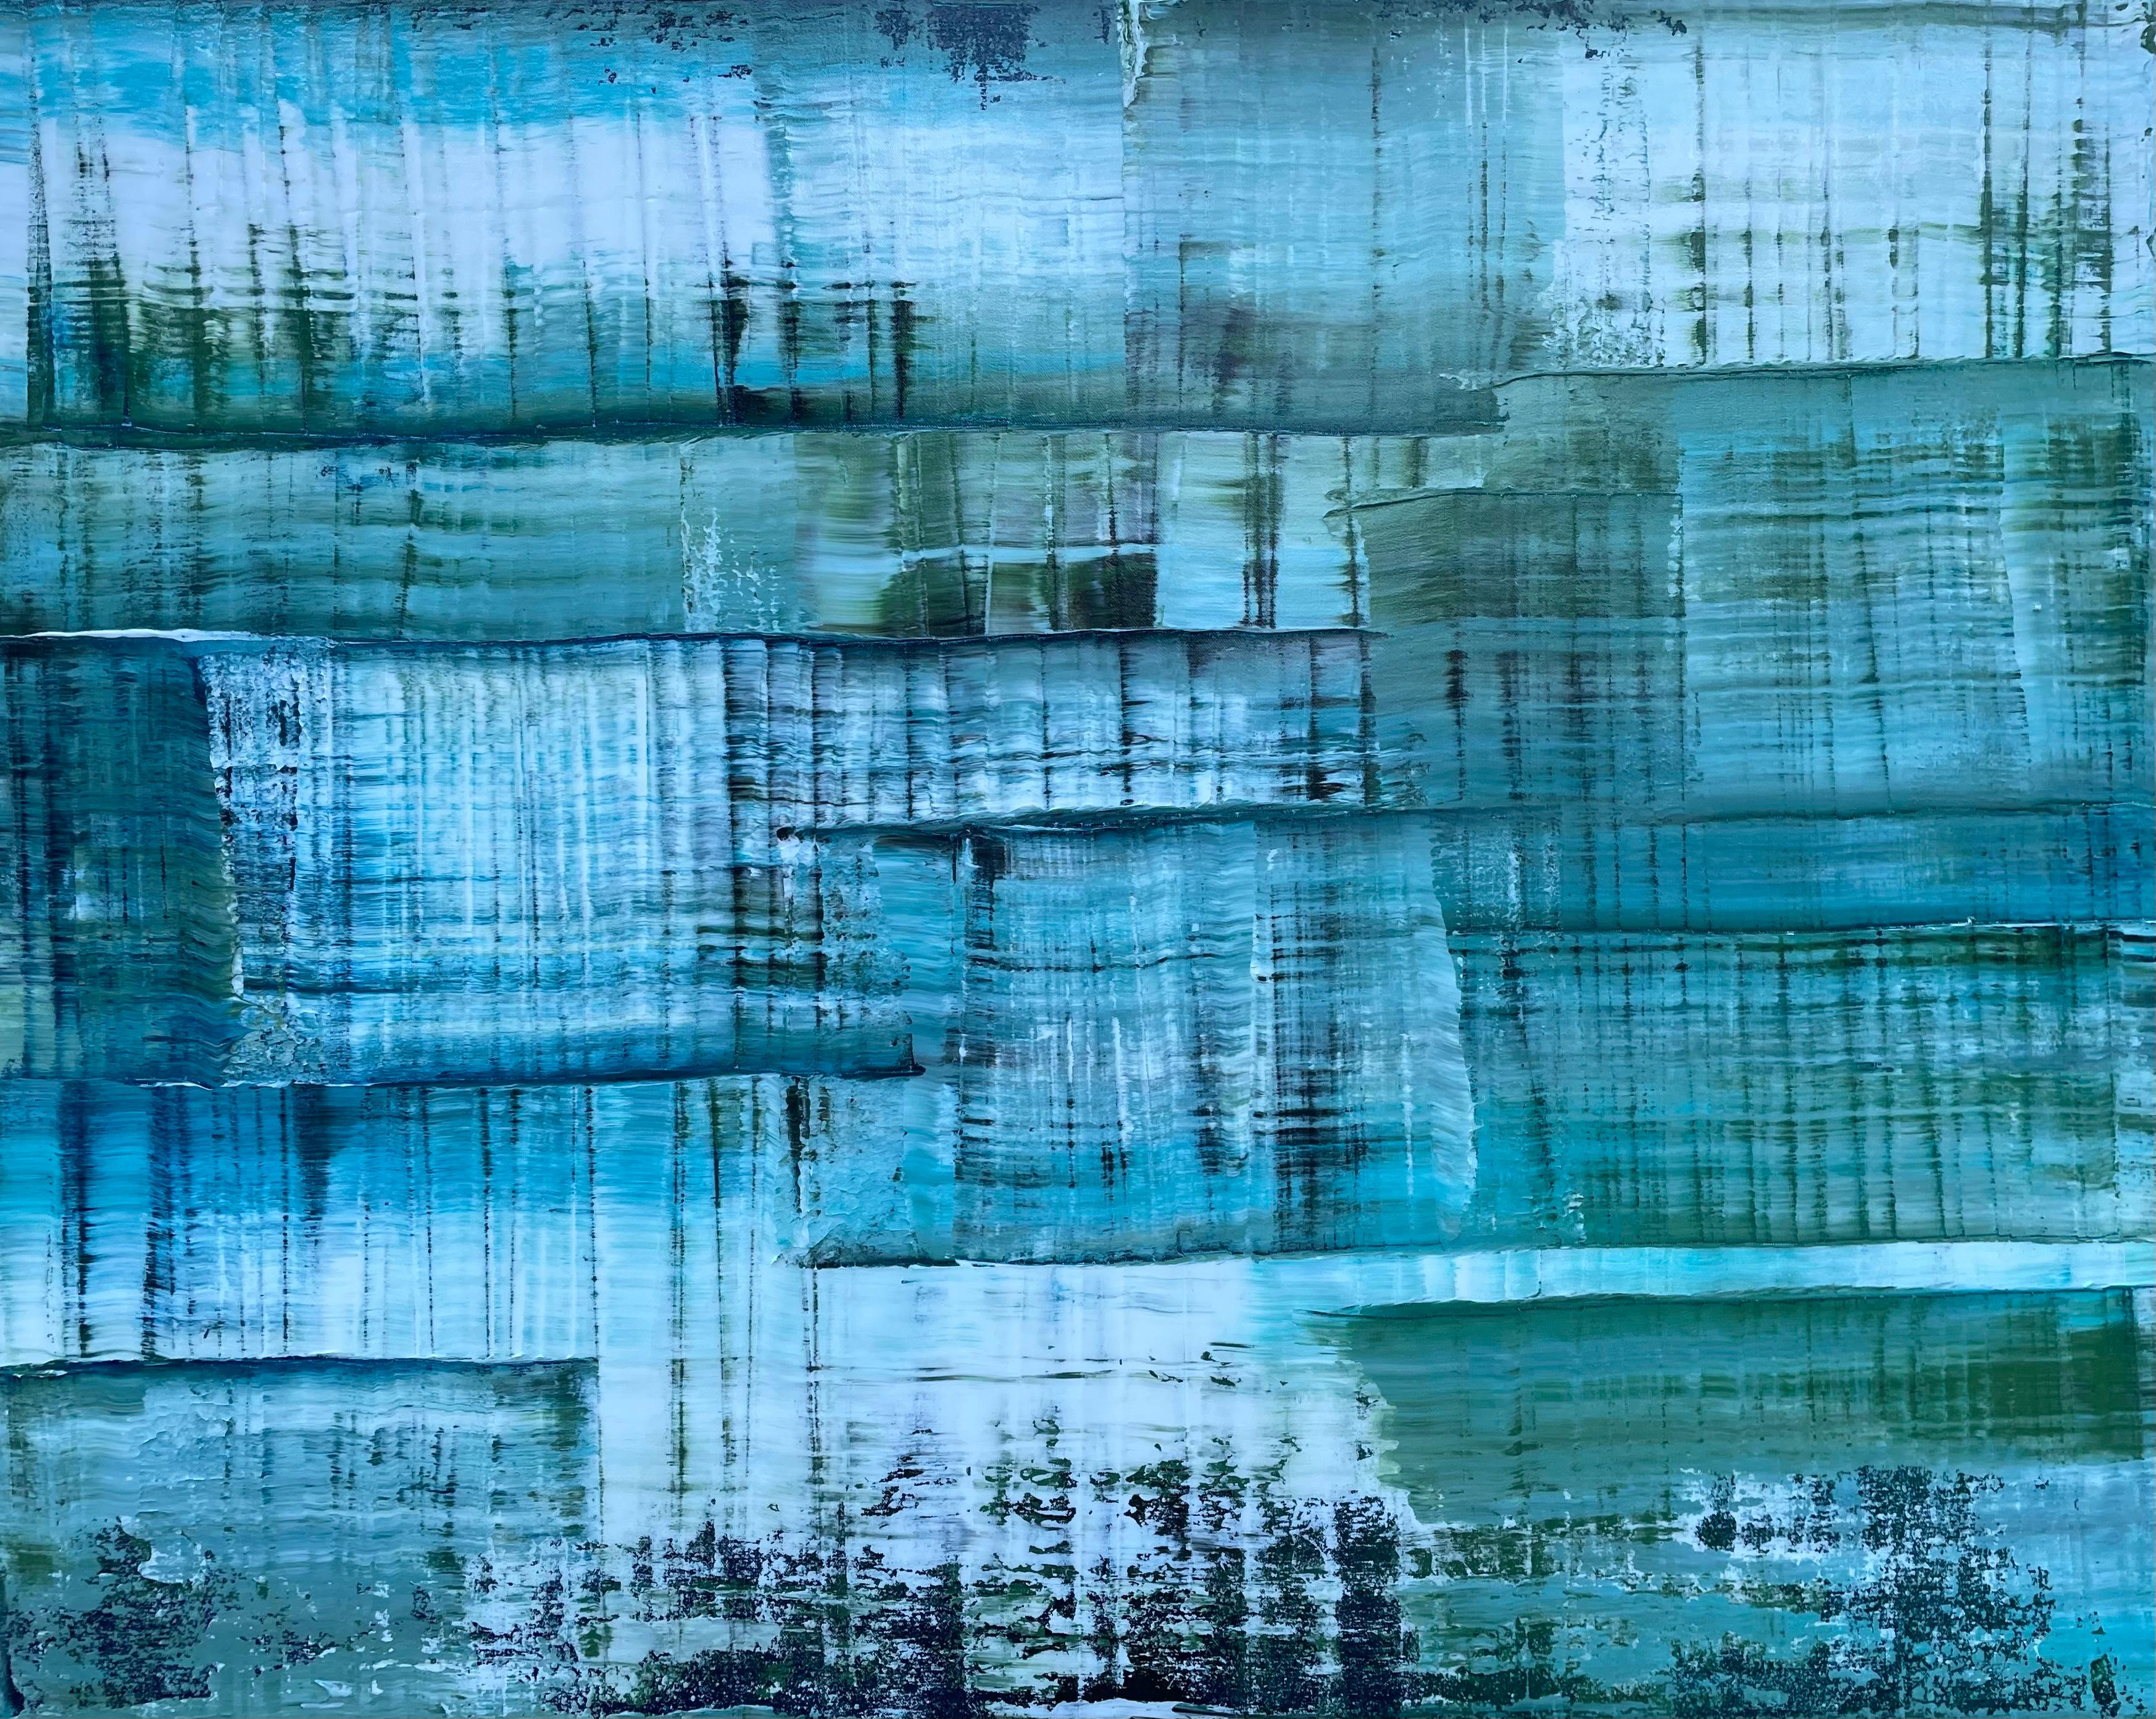 <p>Artist Comments<br>Artist Jason Astorquia presents an abstract snowscape in a cascade of lineated colors. "Ice is melting in ethereal whites as the subdued blue and green earth slowly hints at the lively state of Spring," says Jason. The bright